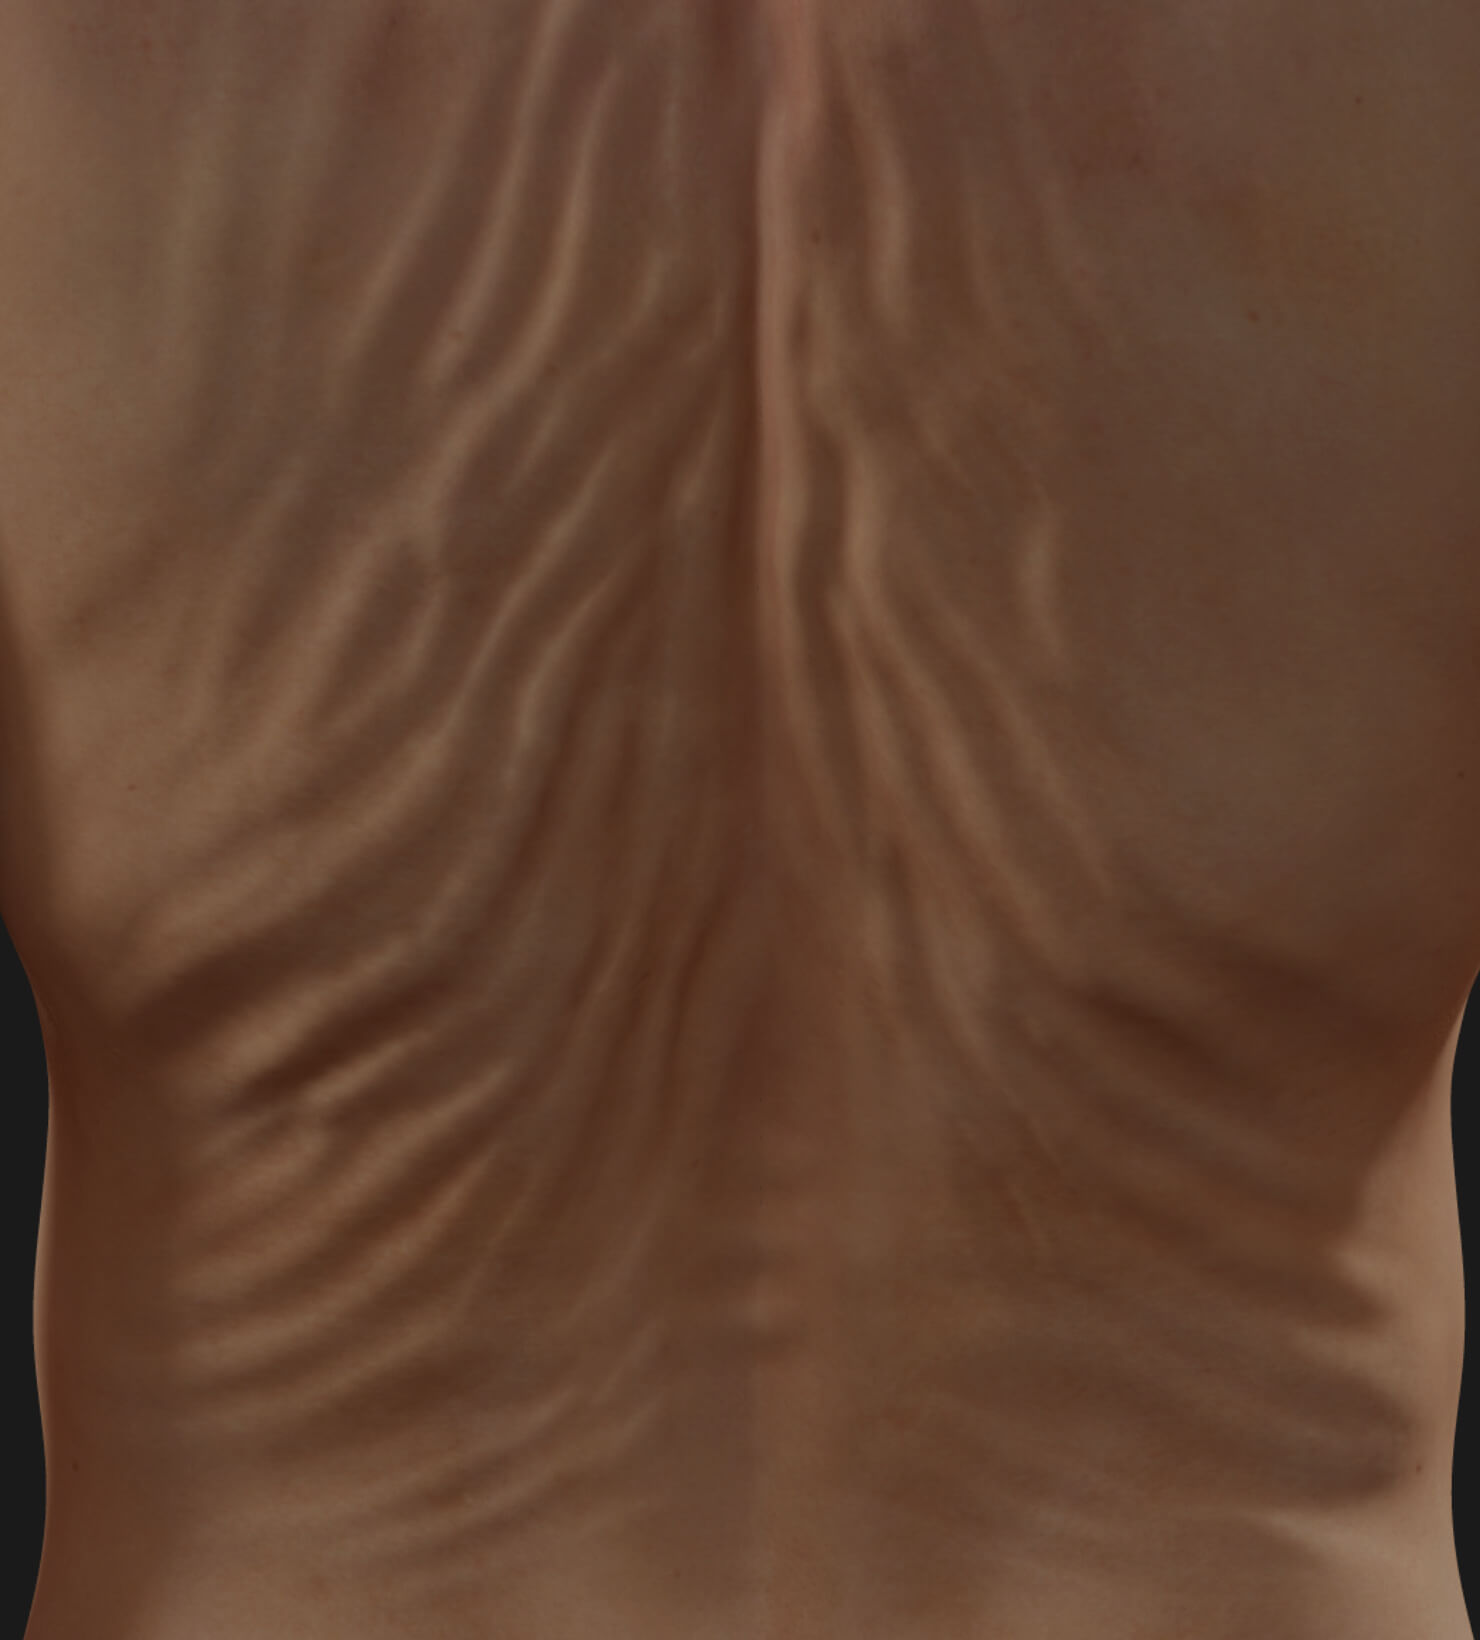 Back of a Clinique Chloé patient showing skin laxity to be treated with Venus Legacy radiofrequency skin tightening